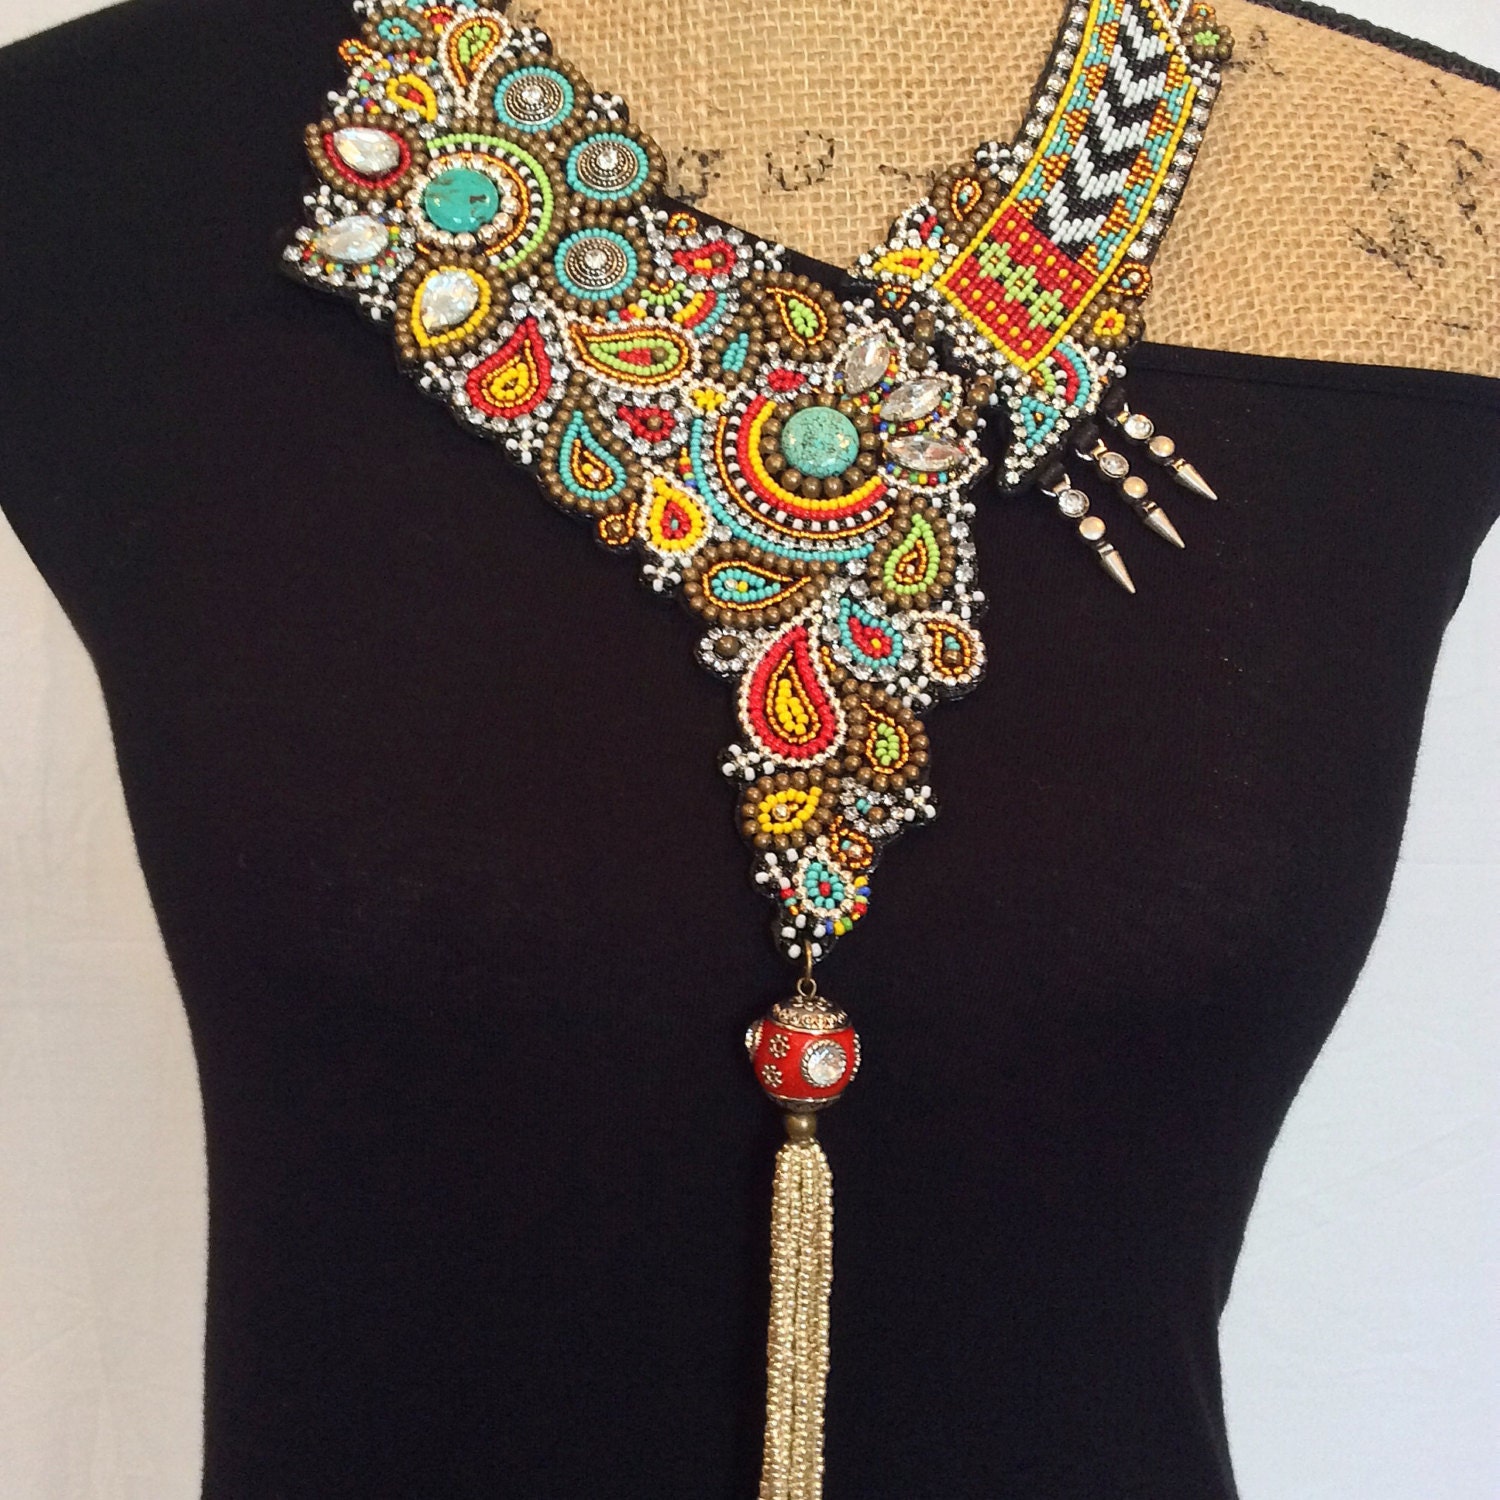 Asymmetrical Bead Embroidery Necklace with Tassel Statement